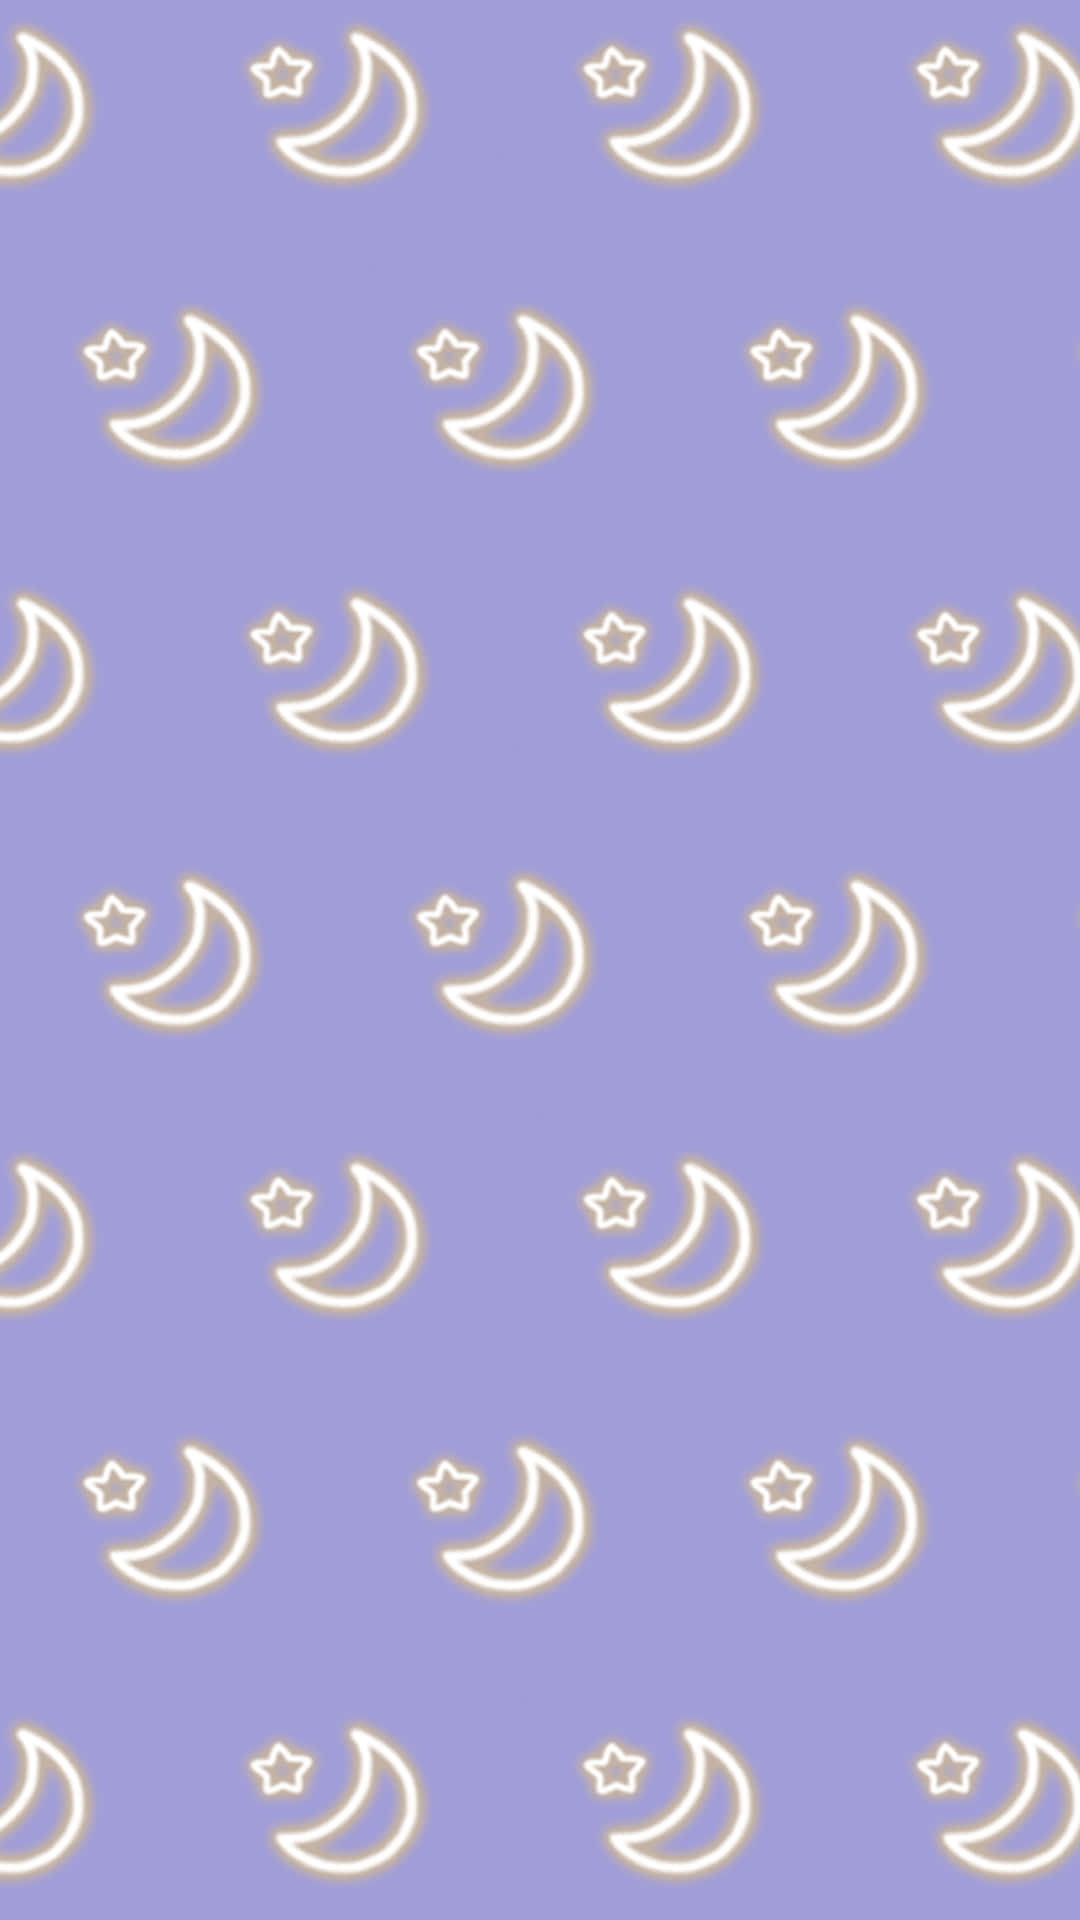 Free Pastel Witch Wallpaper Downloads, Pastel Witch Wallpaper for FREE